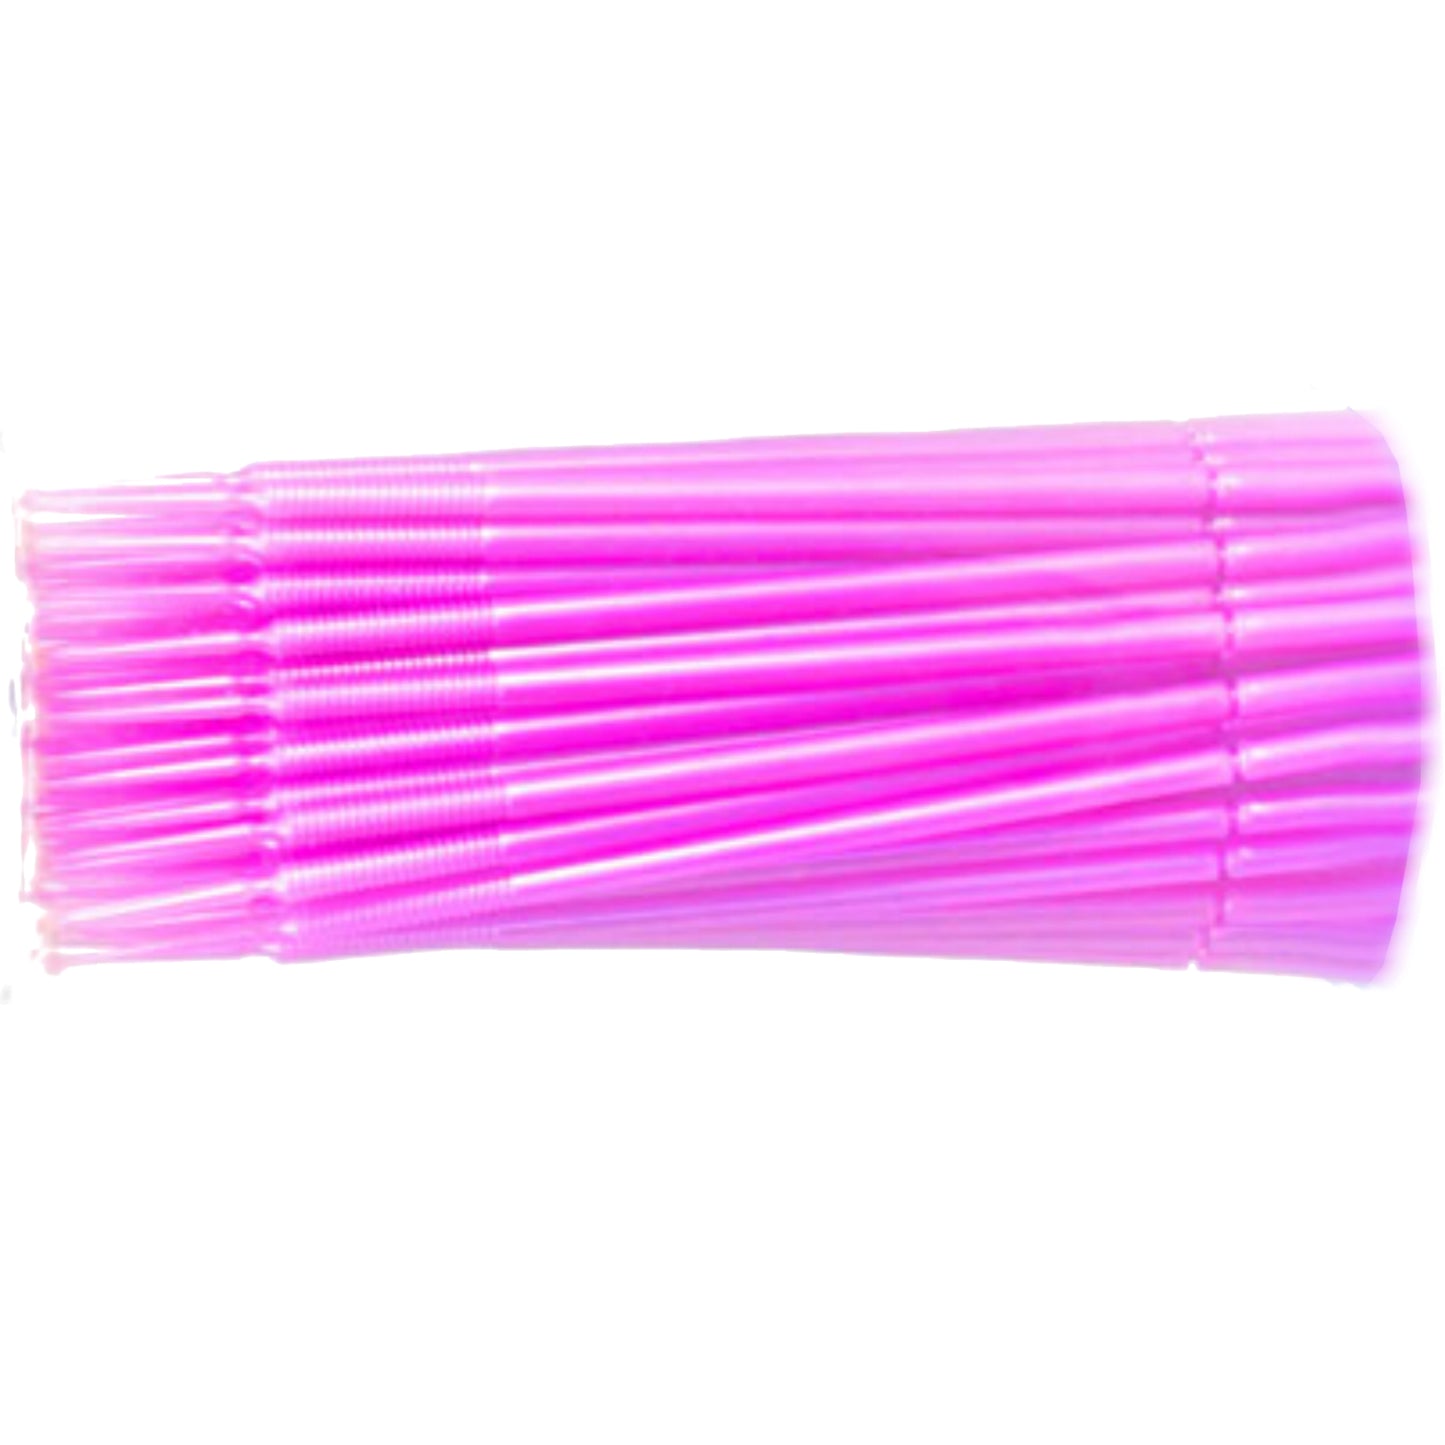 NYK1 Disposable Micro Swabs